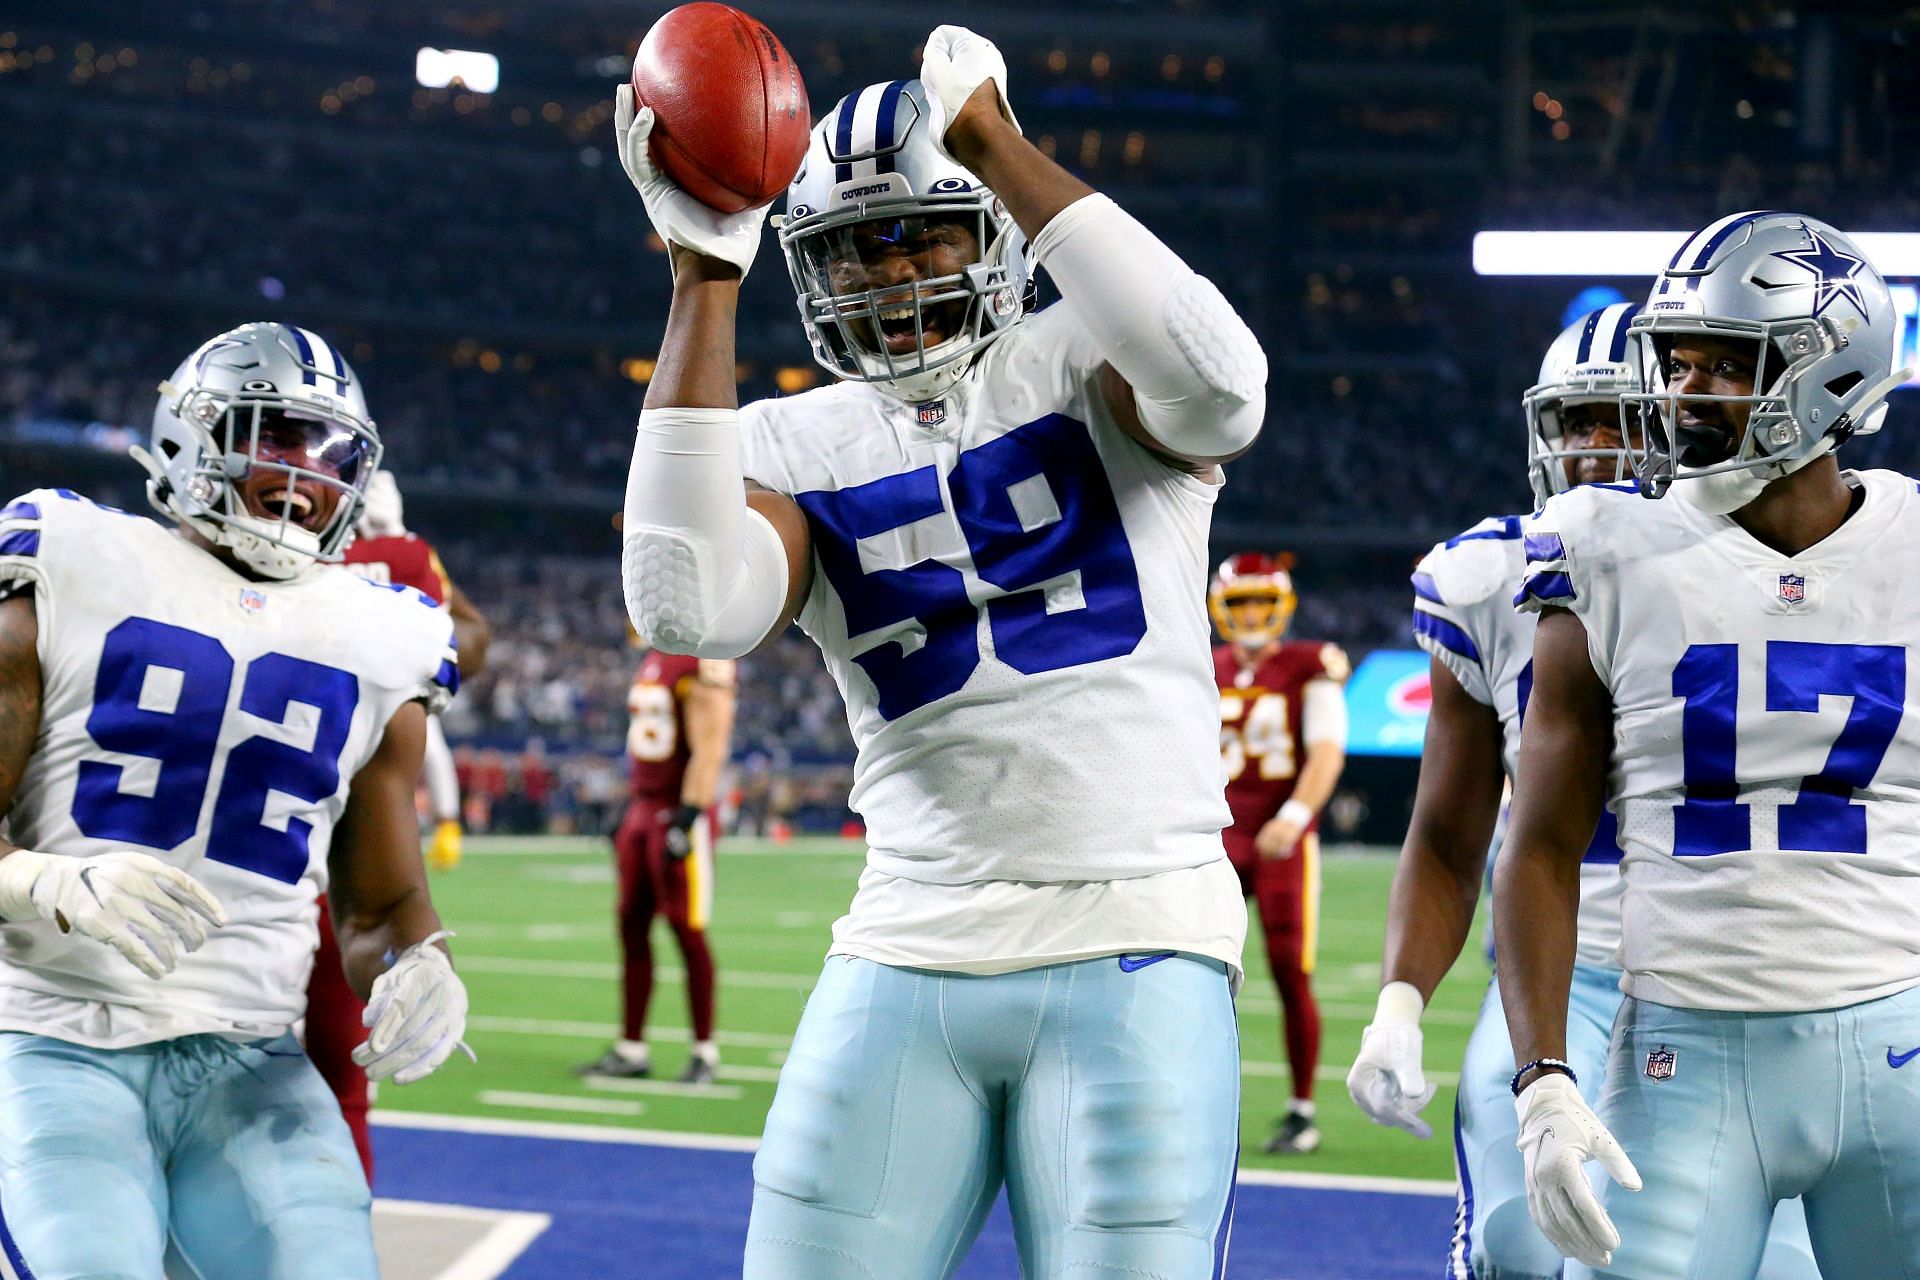 The Dallas Cowboys celebrate one of their many touchdowns on Sunday night vs. Washington (Photo: Getty)